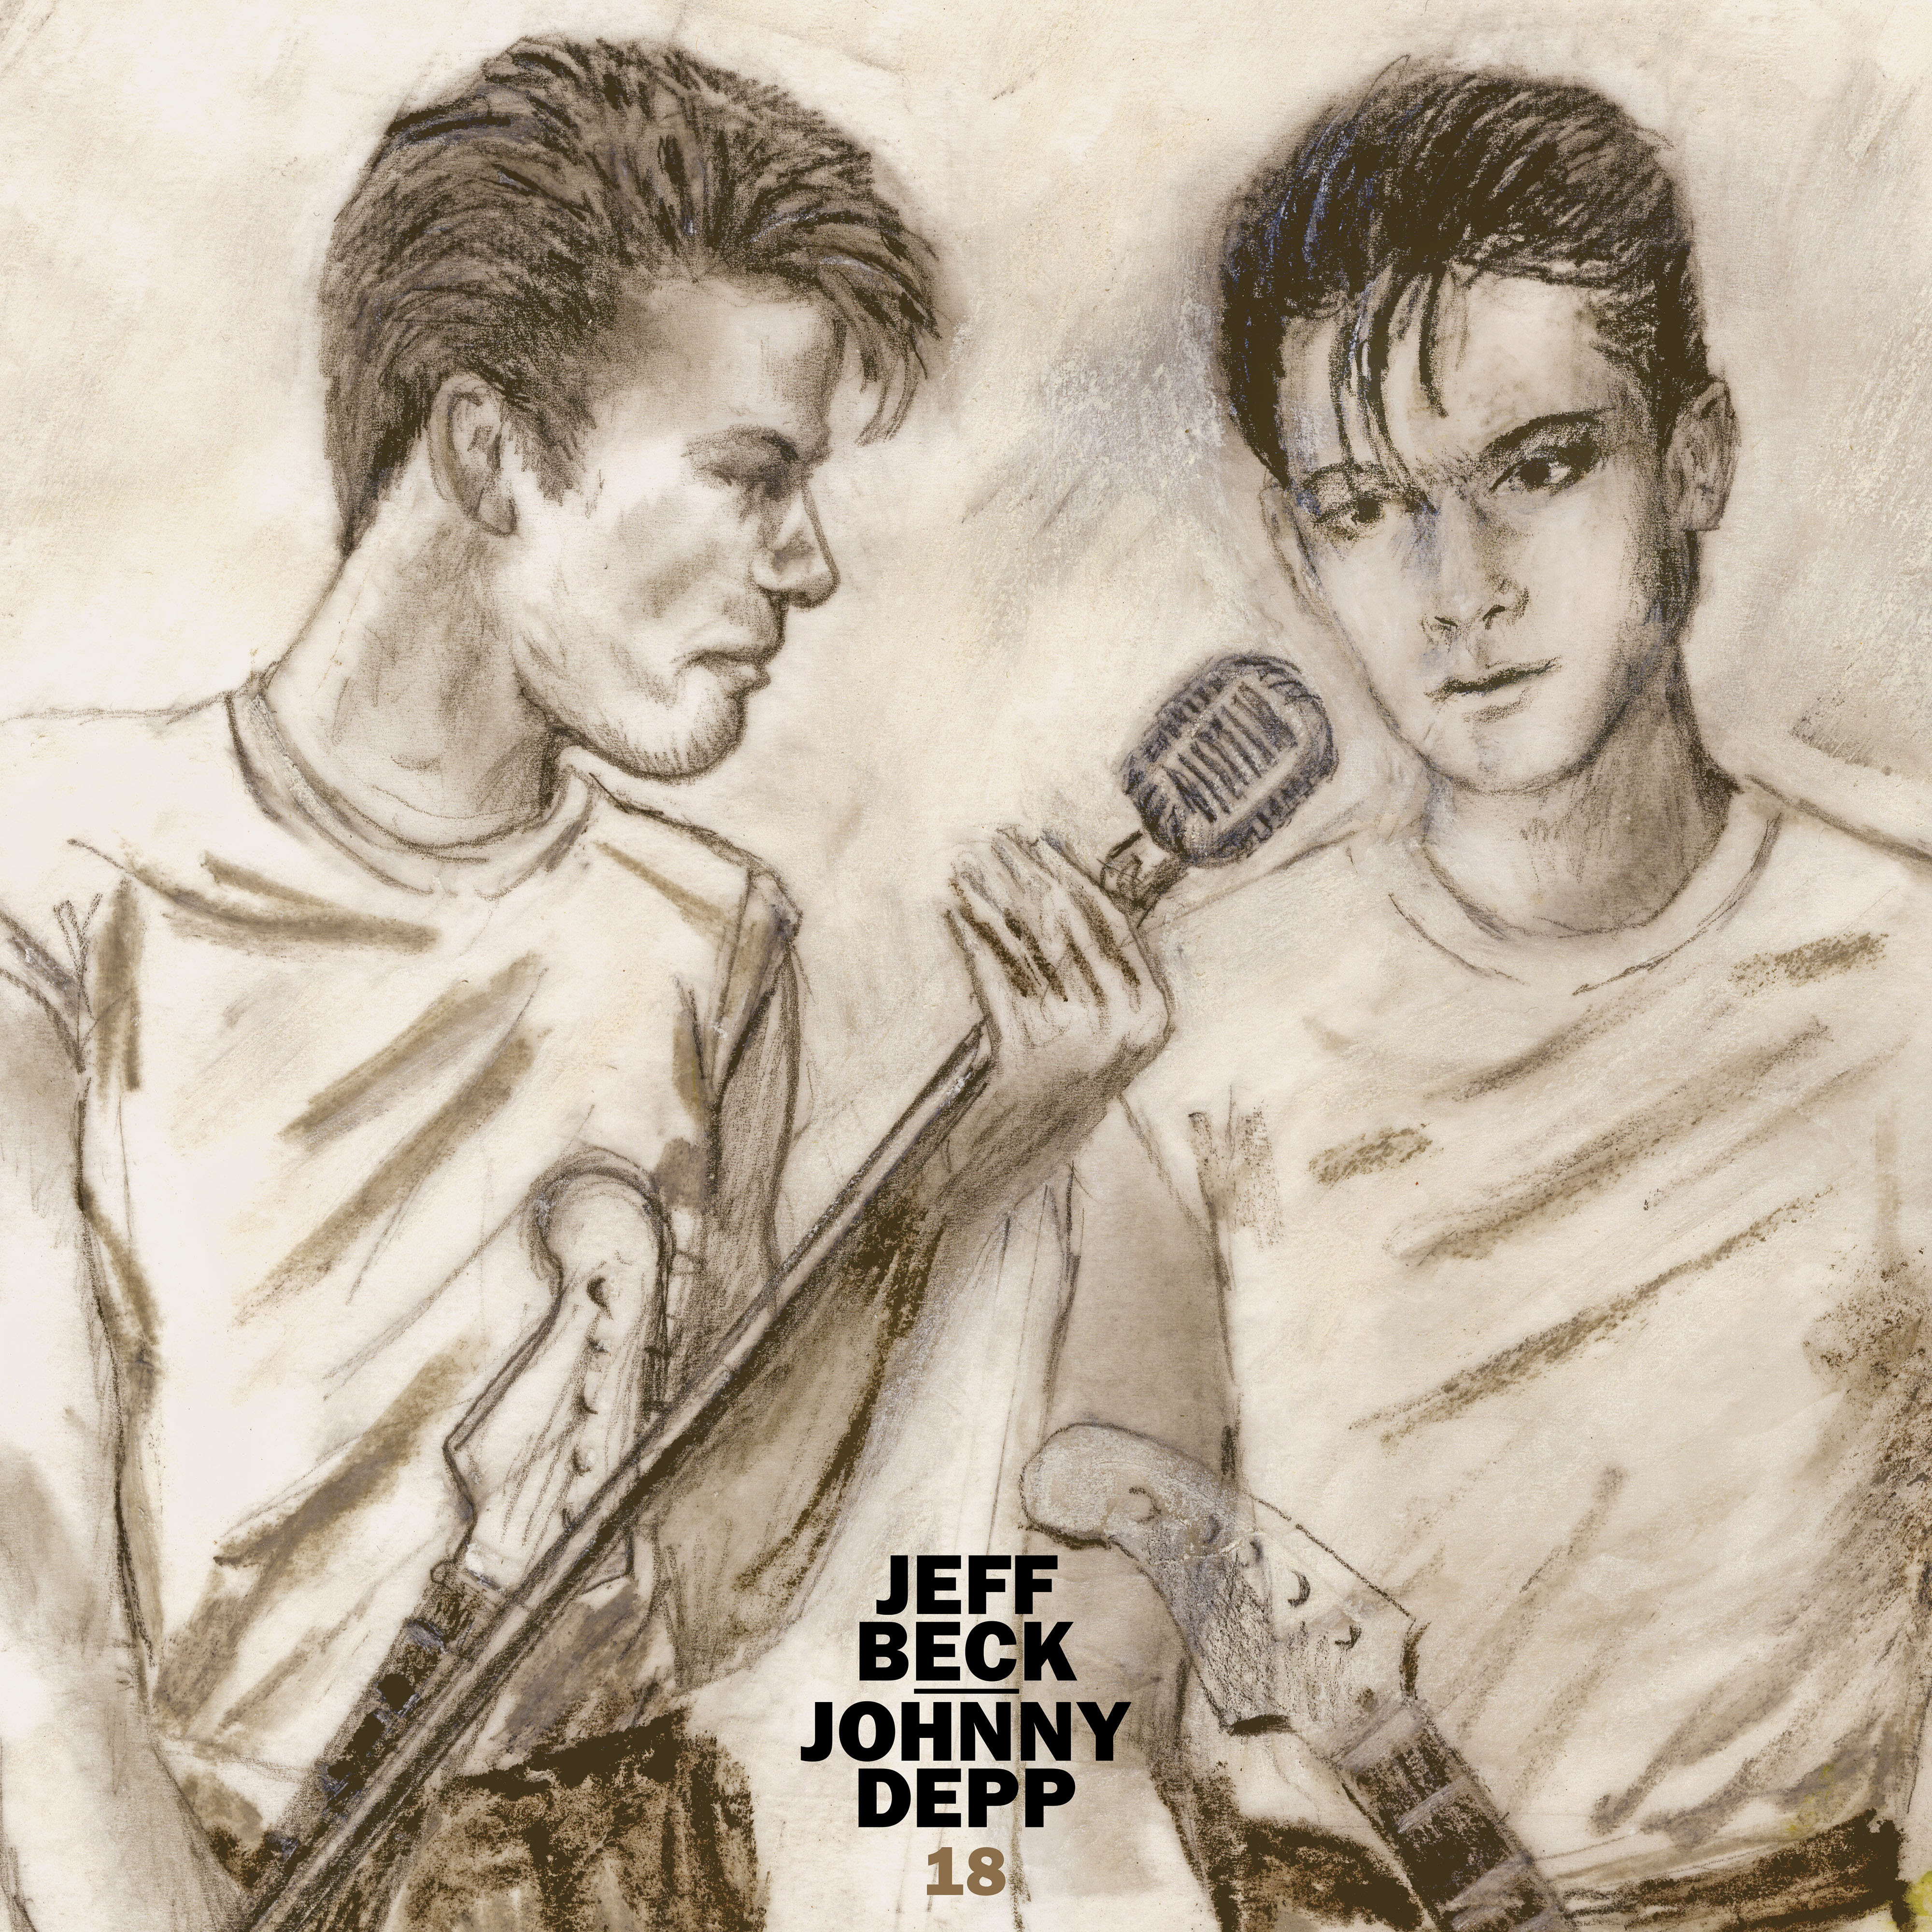 Jeff Beck And Johnny Depp - New Album "18" Available July 15 + First Single And Video Out Now